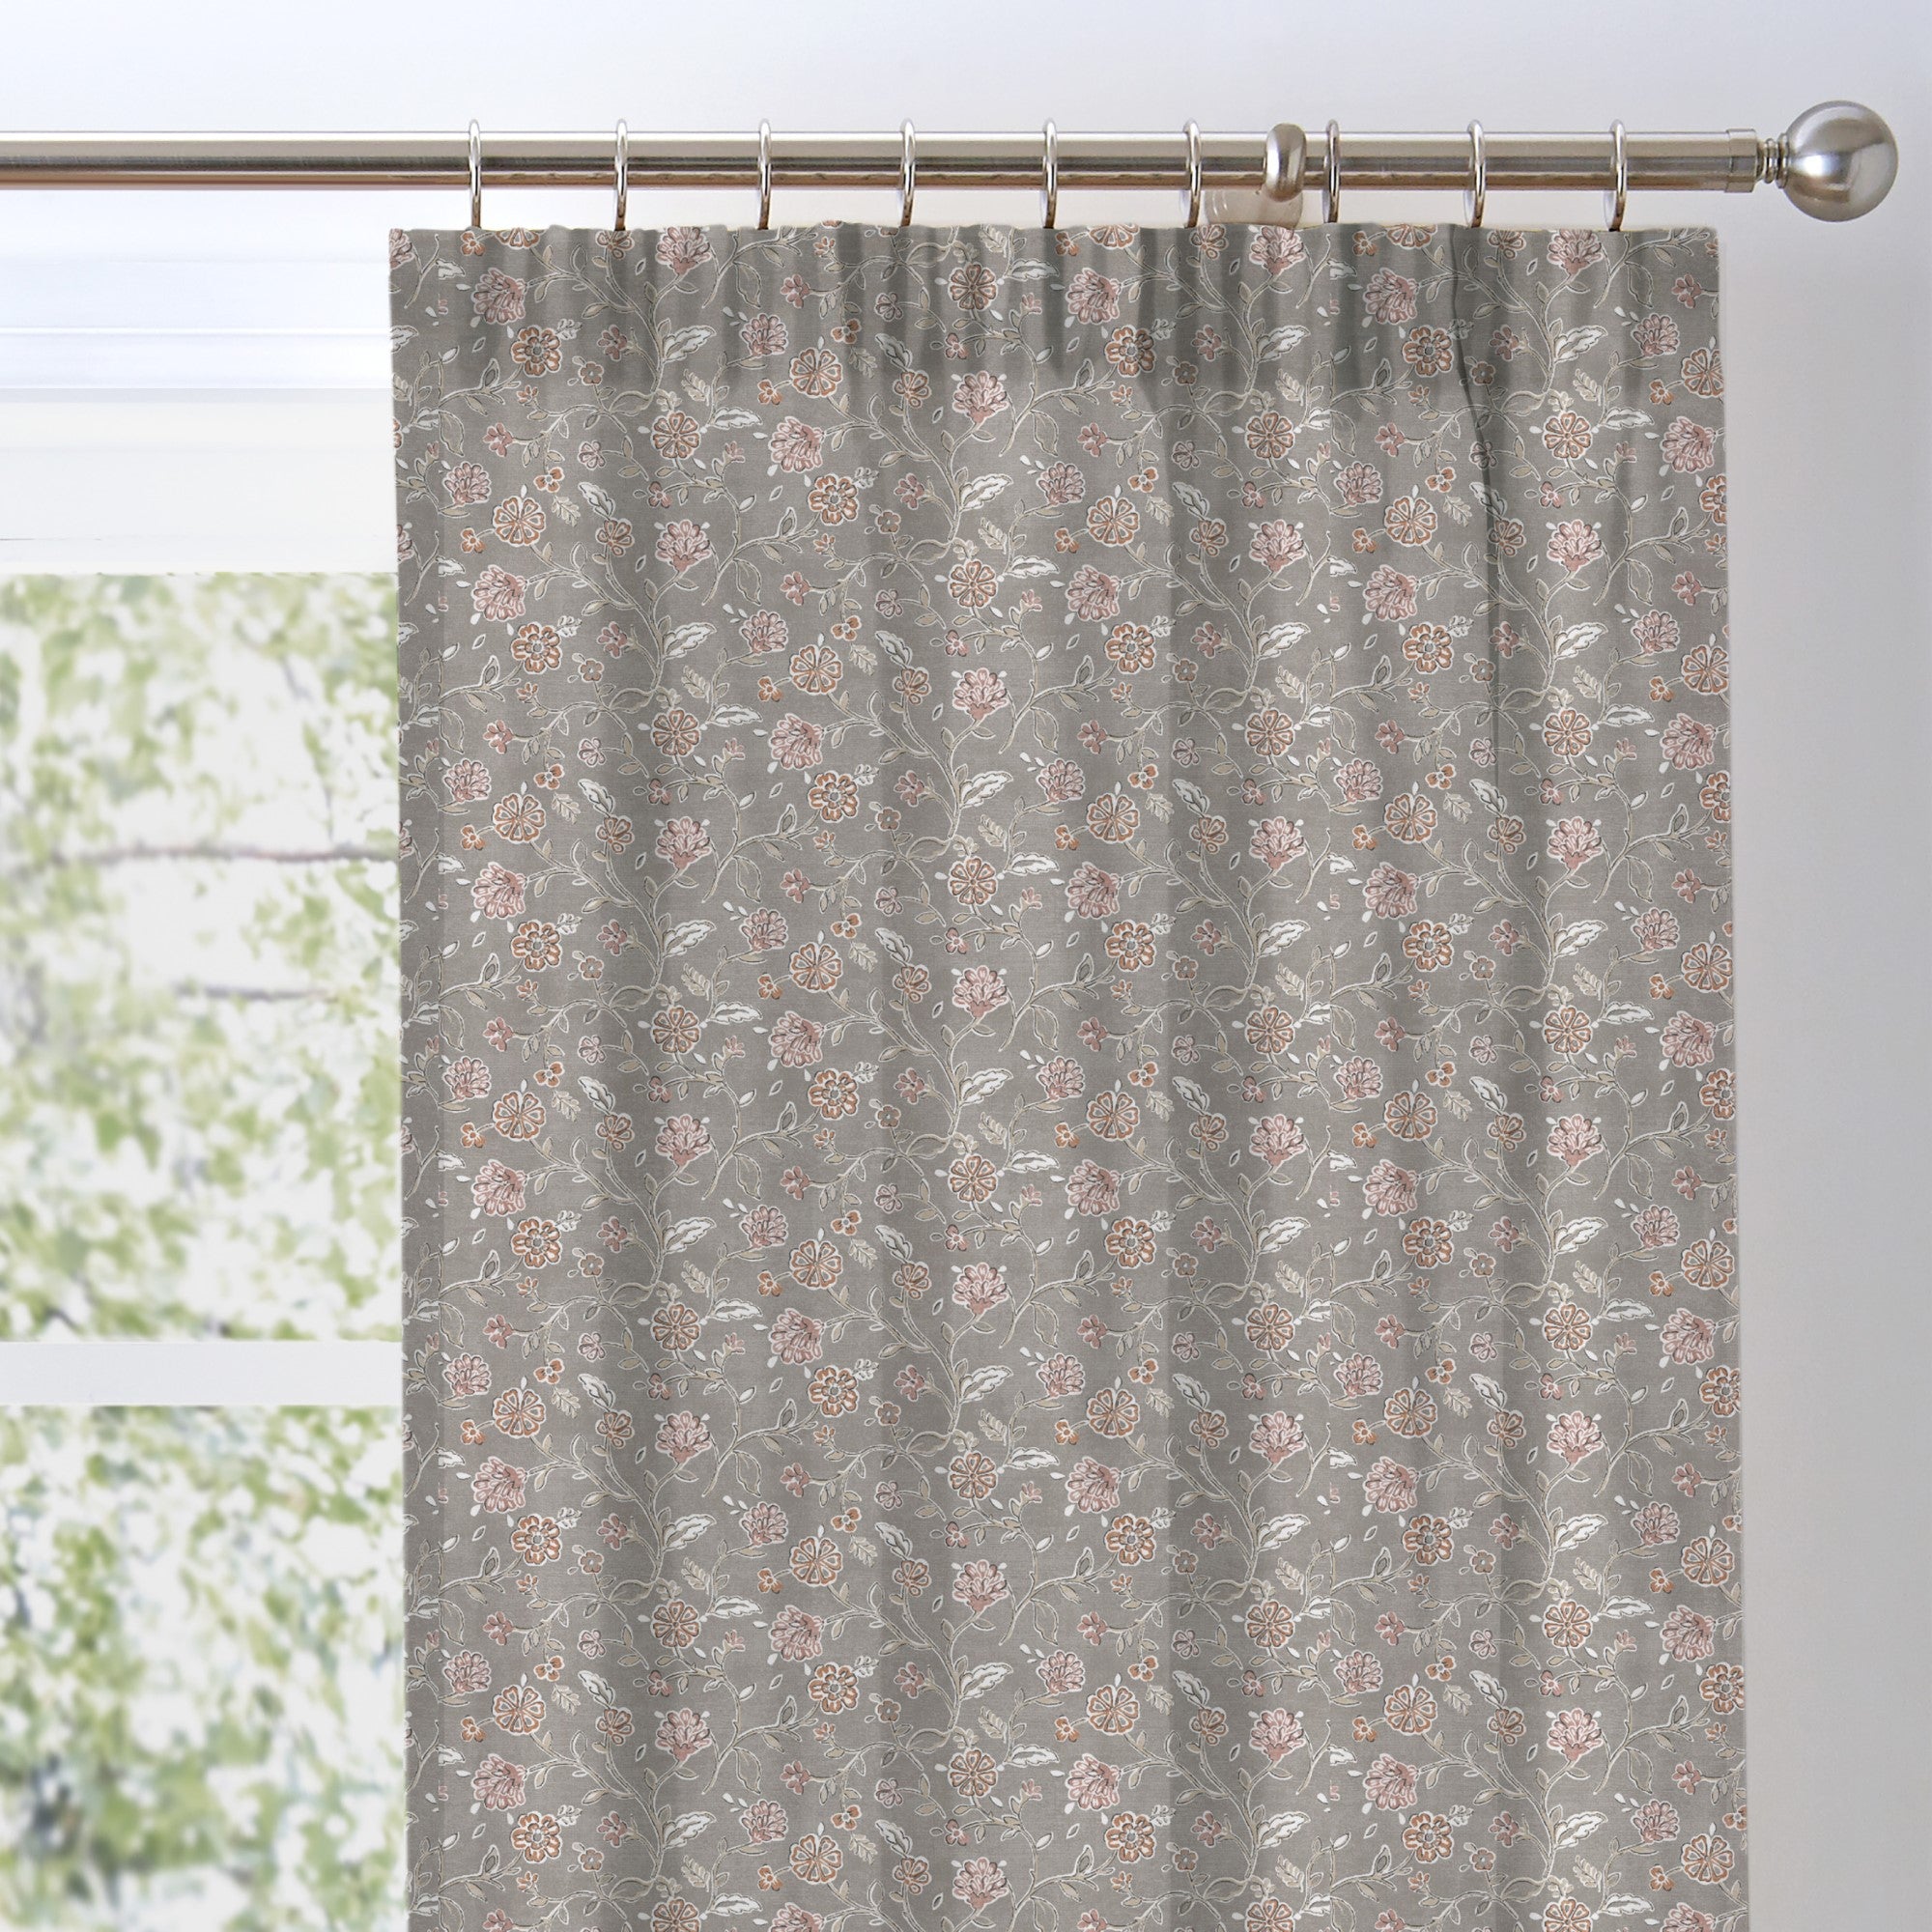 Pair of Eyelet Curtains Roselle by Appletree Promo in Grey